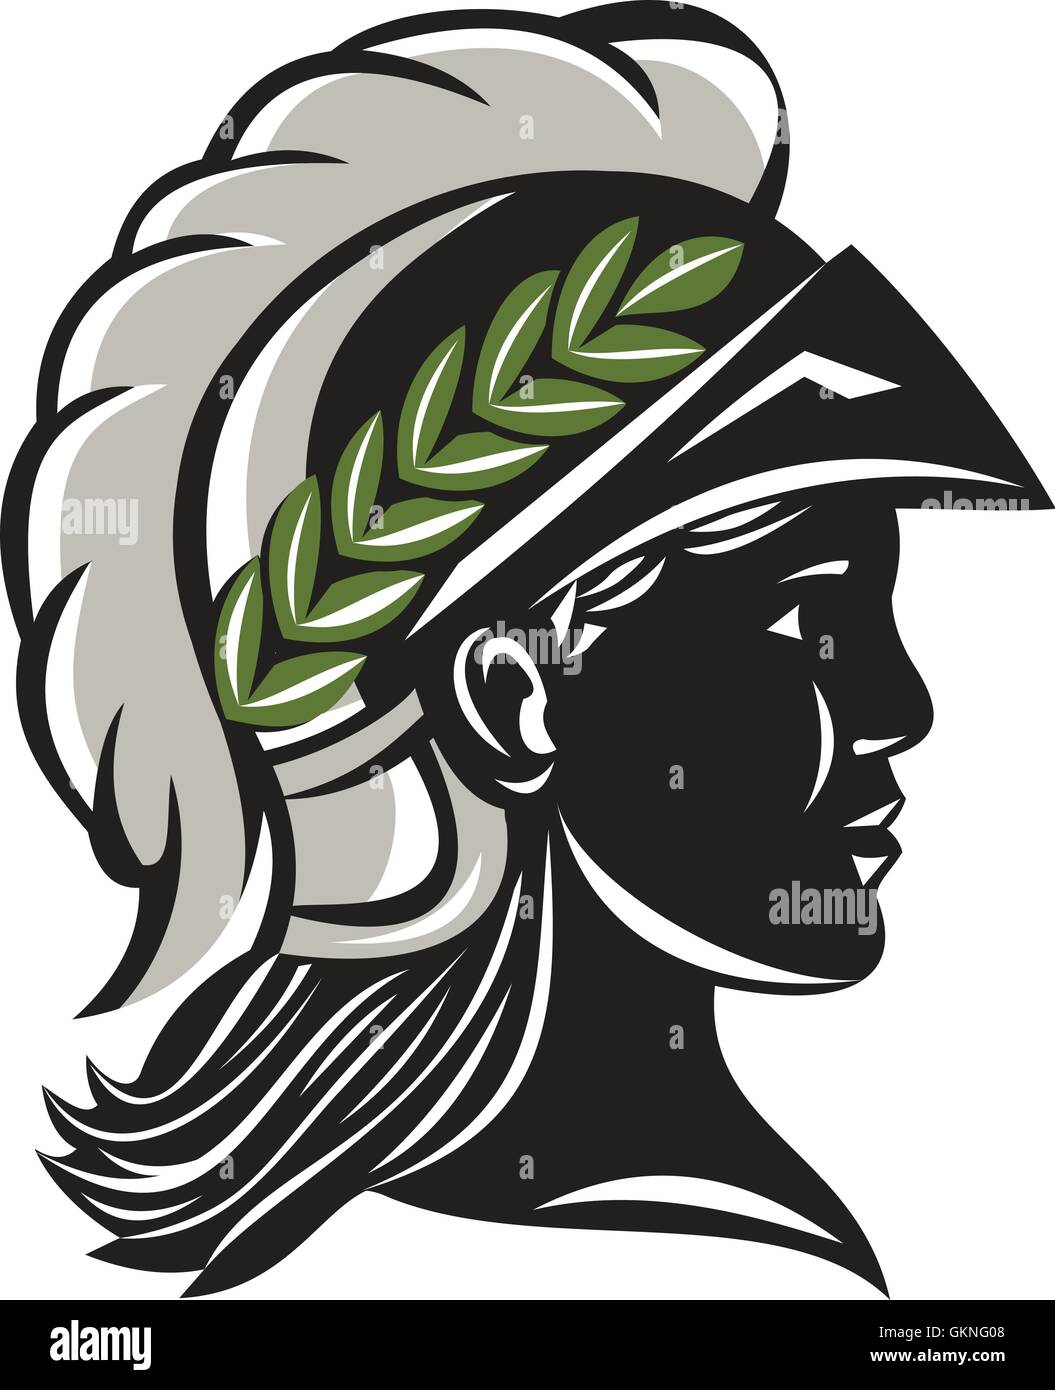 Illustration of Minerva or Menrva, the Roman goddess of wisdom and sponsor of arts, trade, and strategy wearing helmet and laurel crown head in a silhouette viewed from side set on isolated white background. Stock Vector